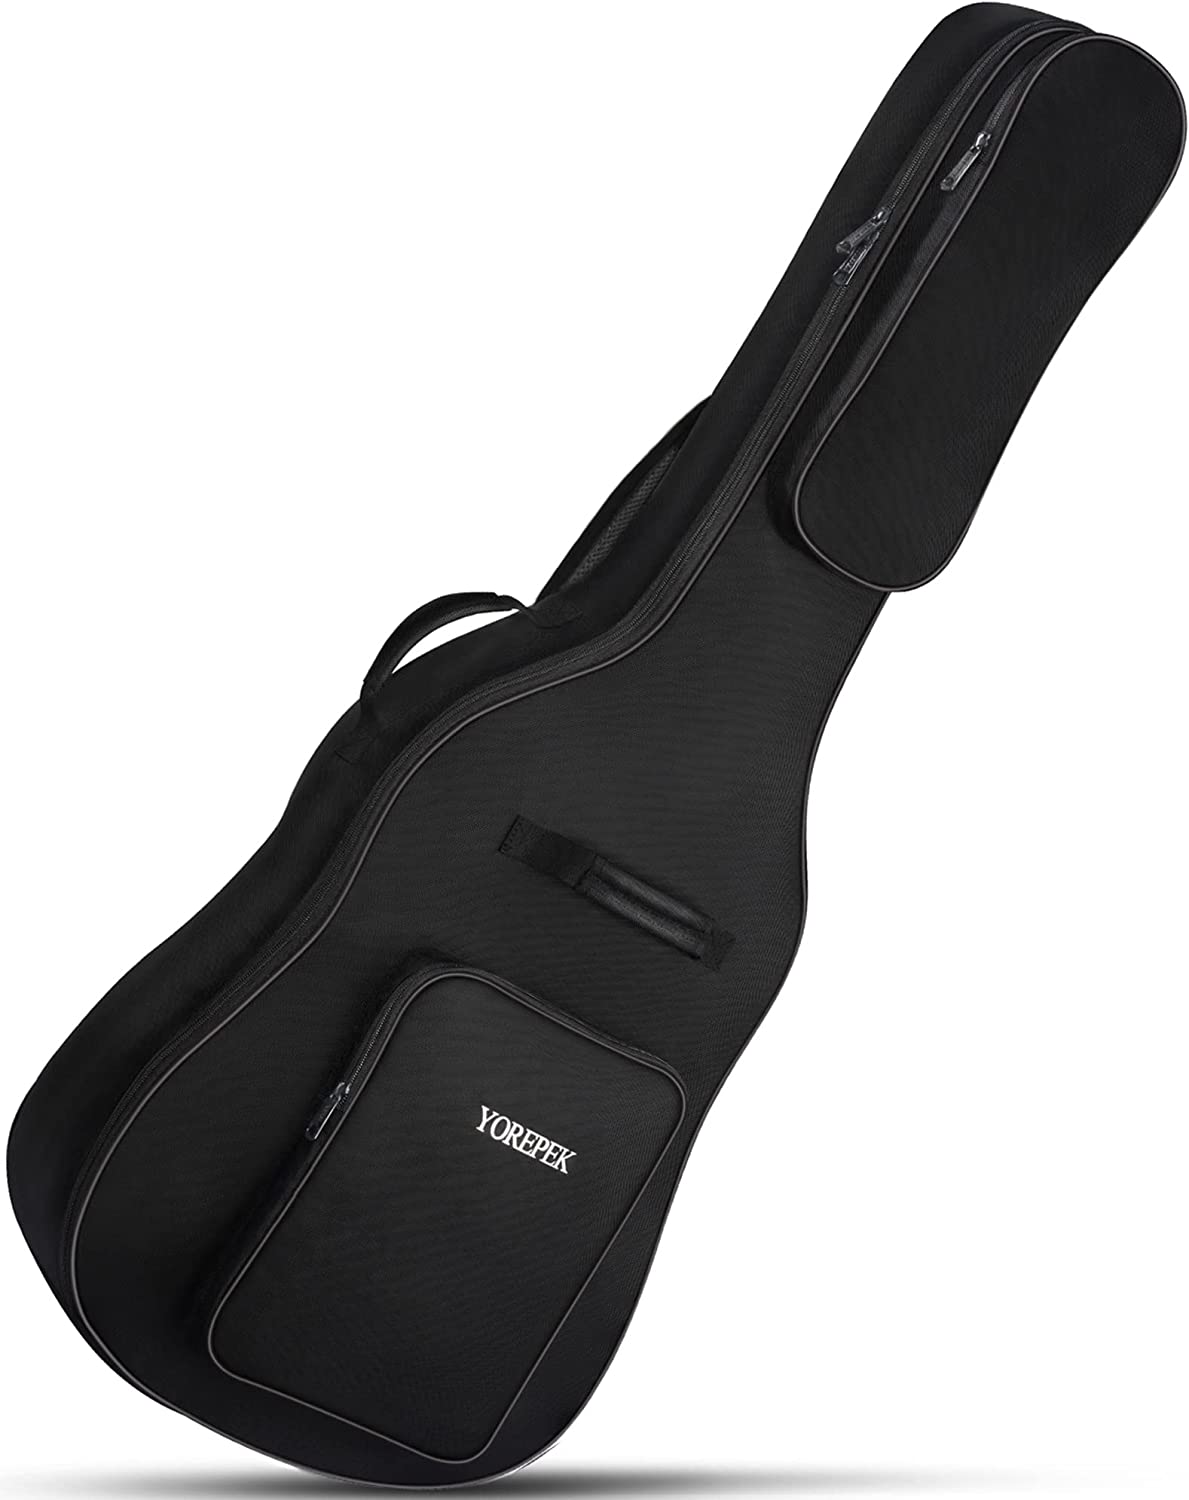 YOREPEK 41 Inch Guitar Bag on a white background